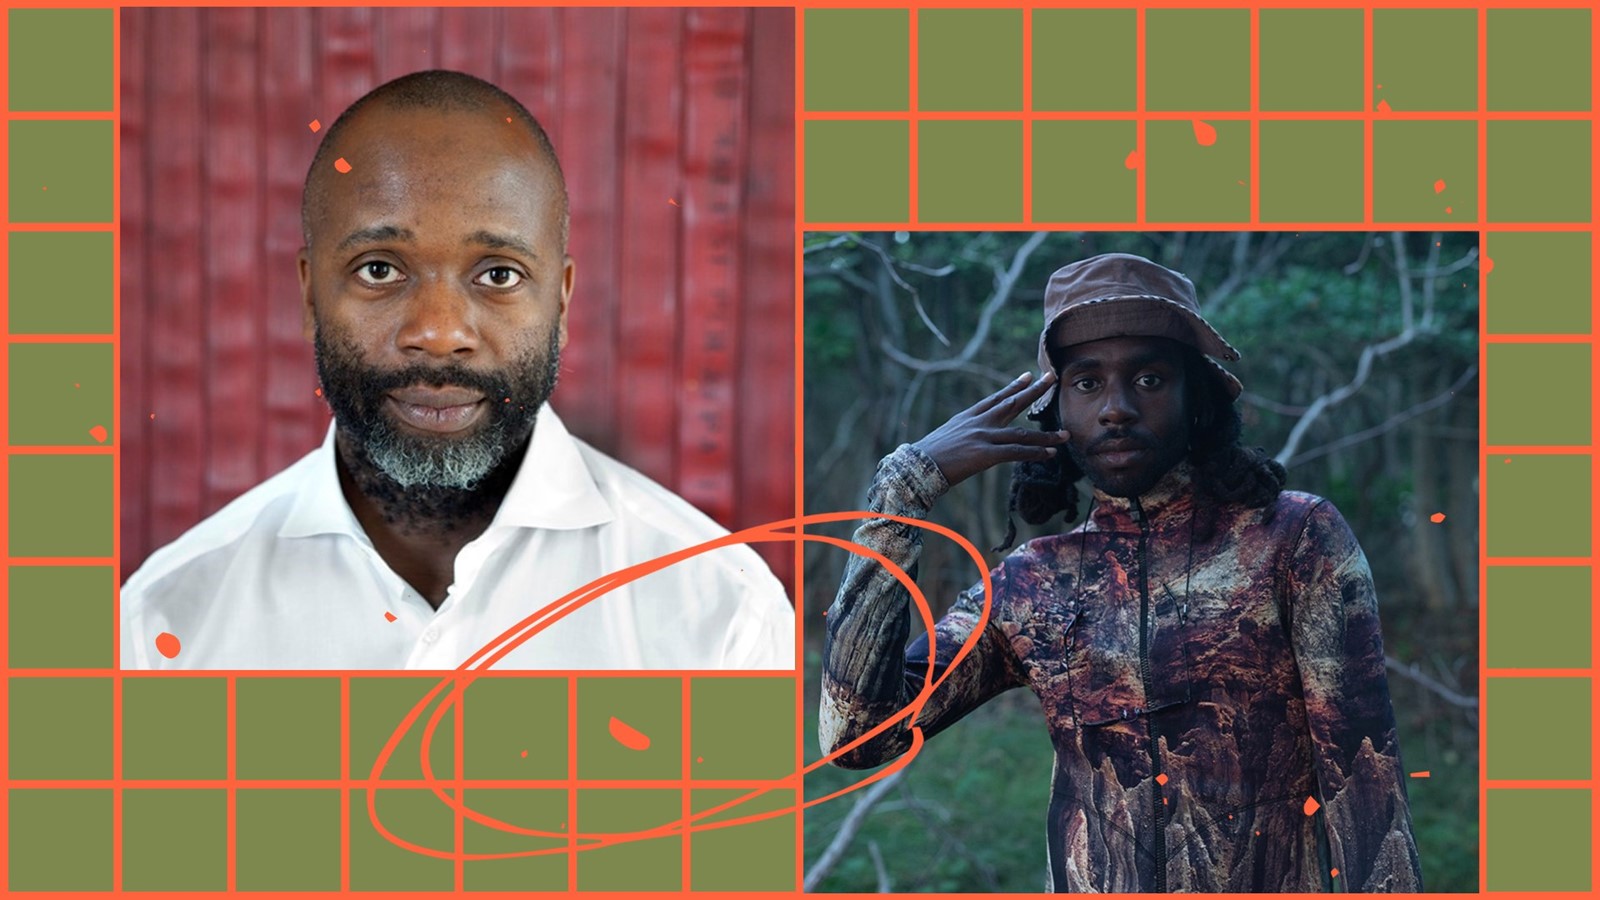 theaster gates and dev hynes